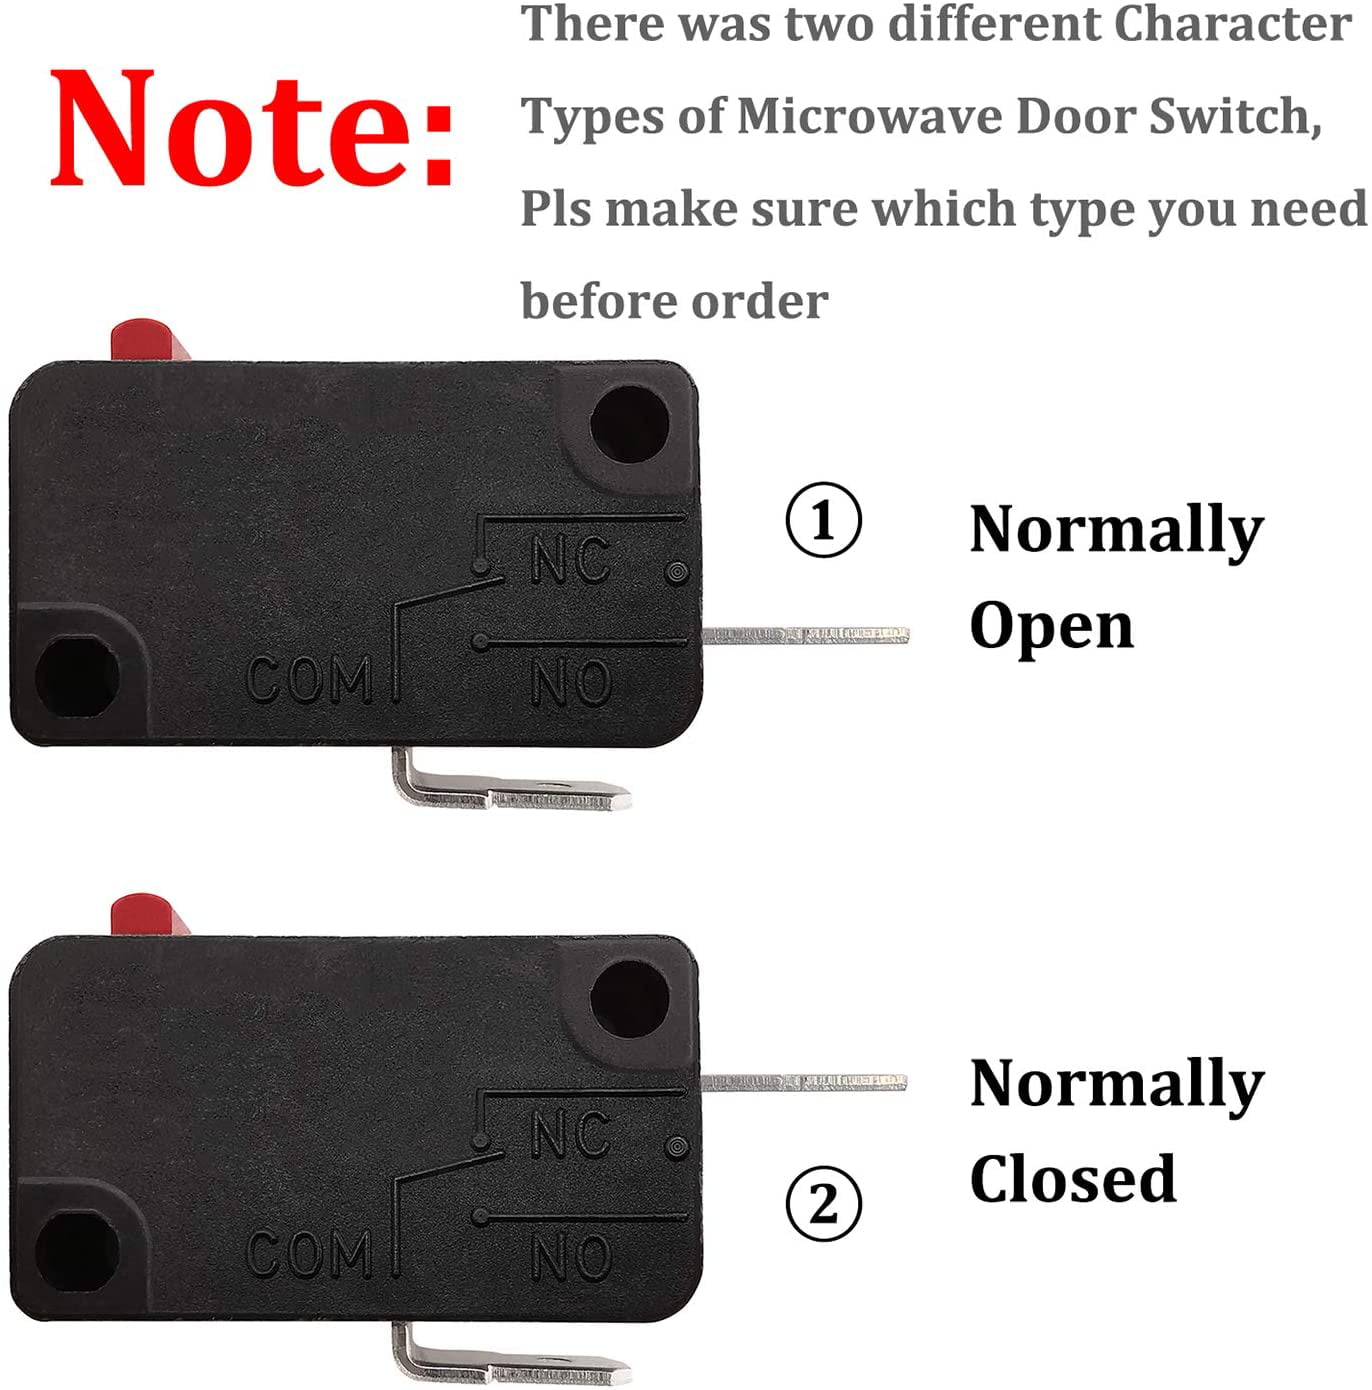 TWTADE/4Pcs Universal Microwave Oven Door Micro Switch for DR52 NC 16A 125/250V ZW7-15-R/NC Normally Close 